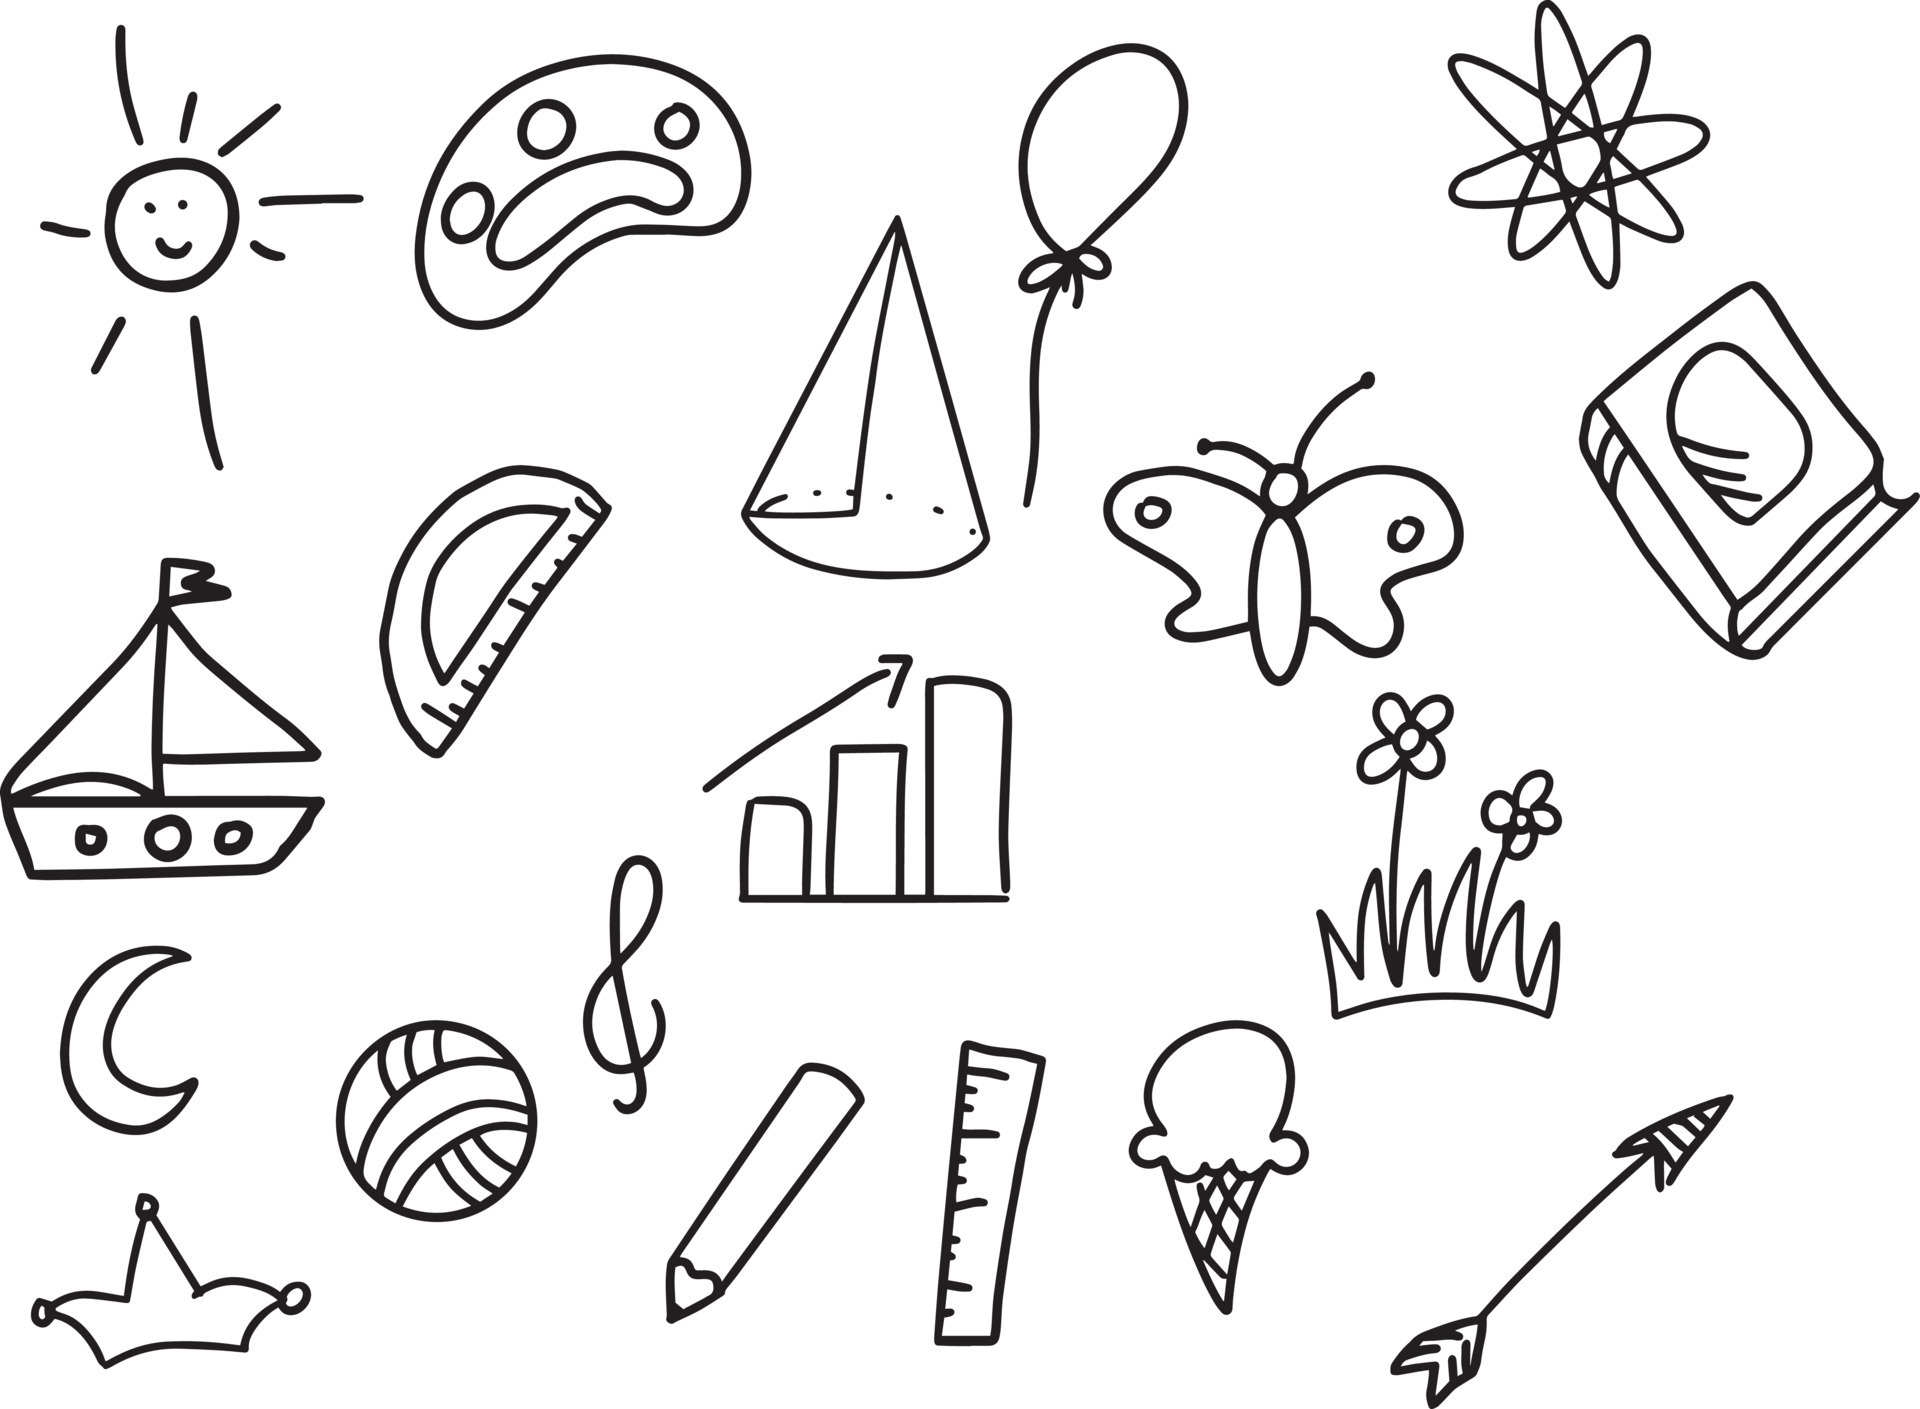 https://static.vecteezy.com/system/resources/previews/009/573/139/original/set-of-children-drawings-hand-drawn-set-of-cute-kids-doodles-black-and-white-outline-vector.jpg